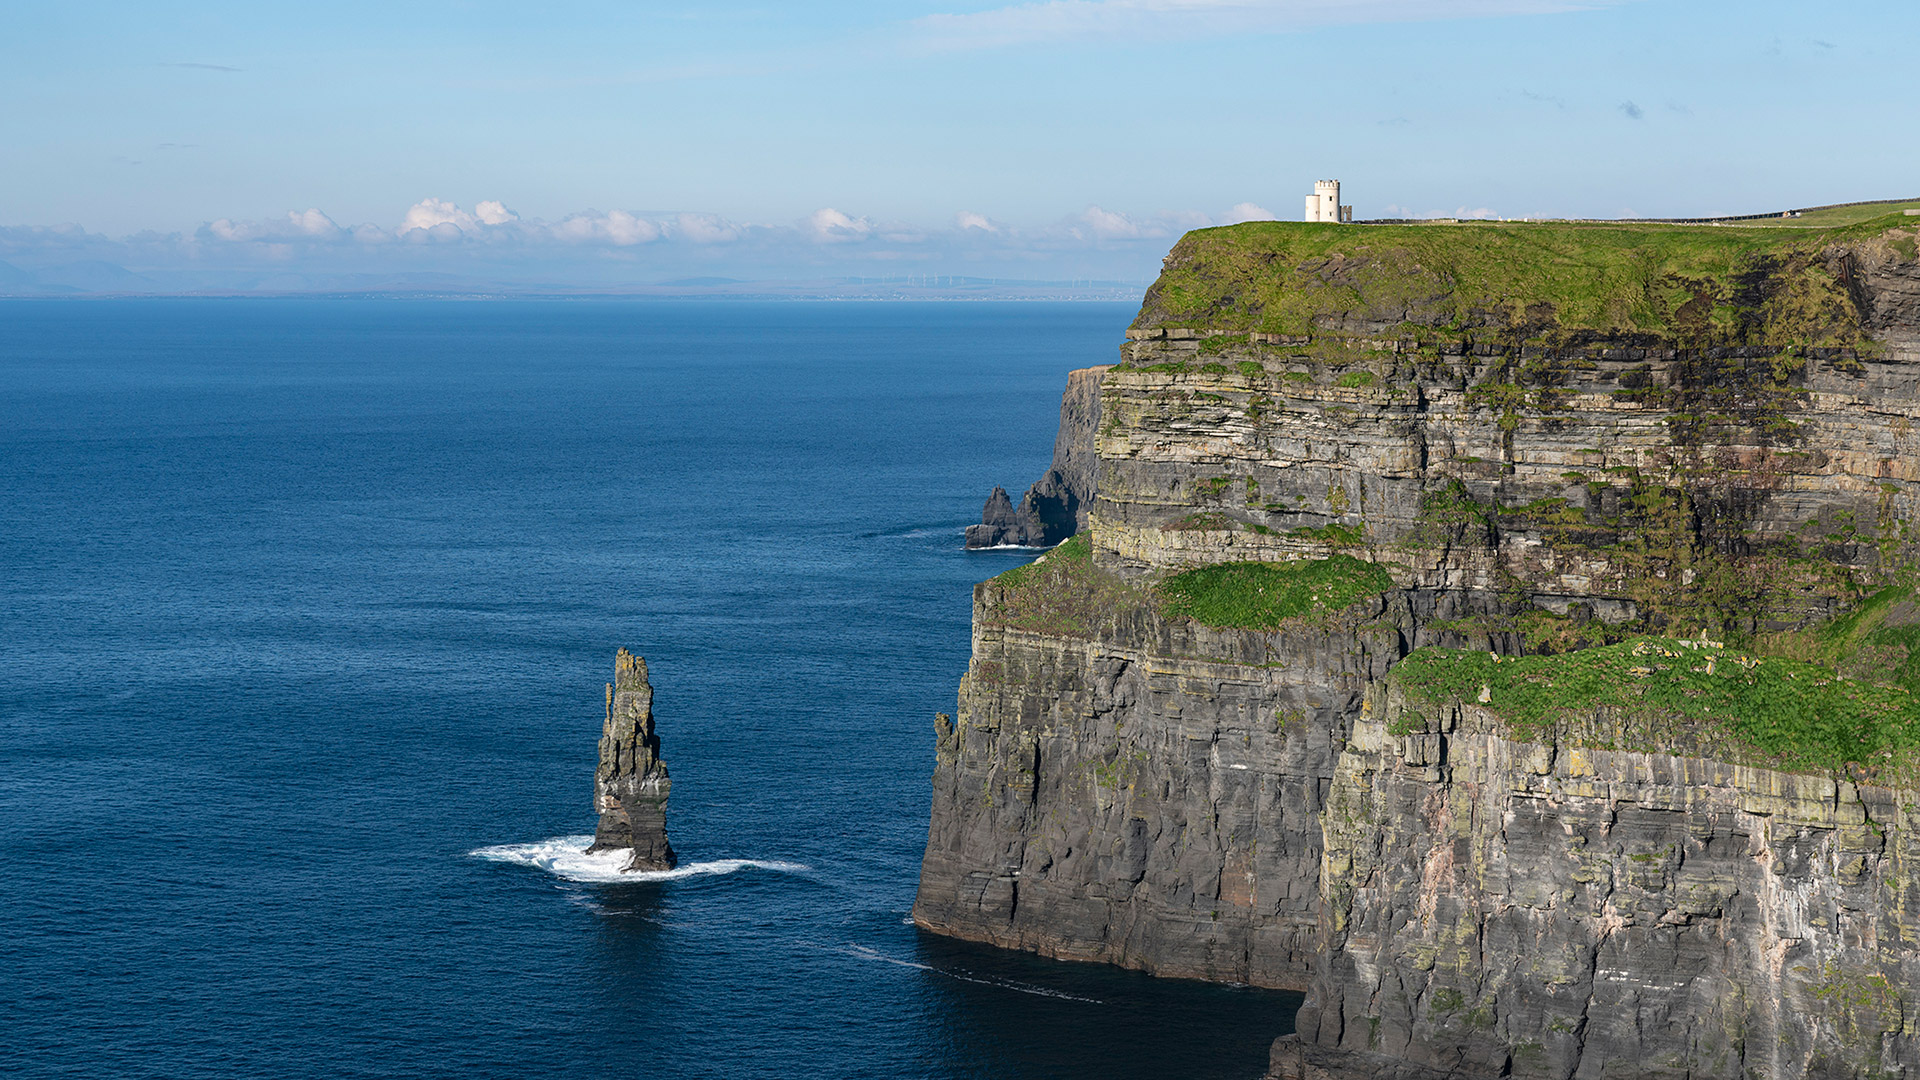 Scenery along the Cliffs of Moher